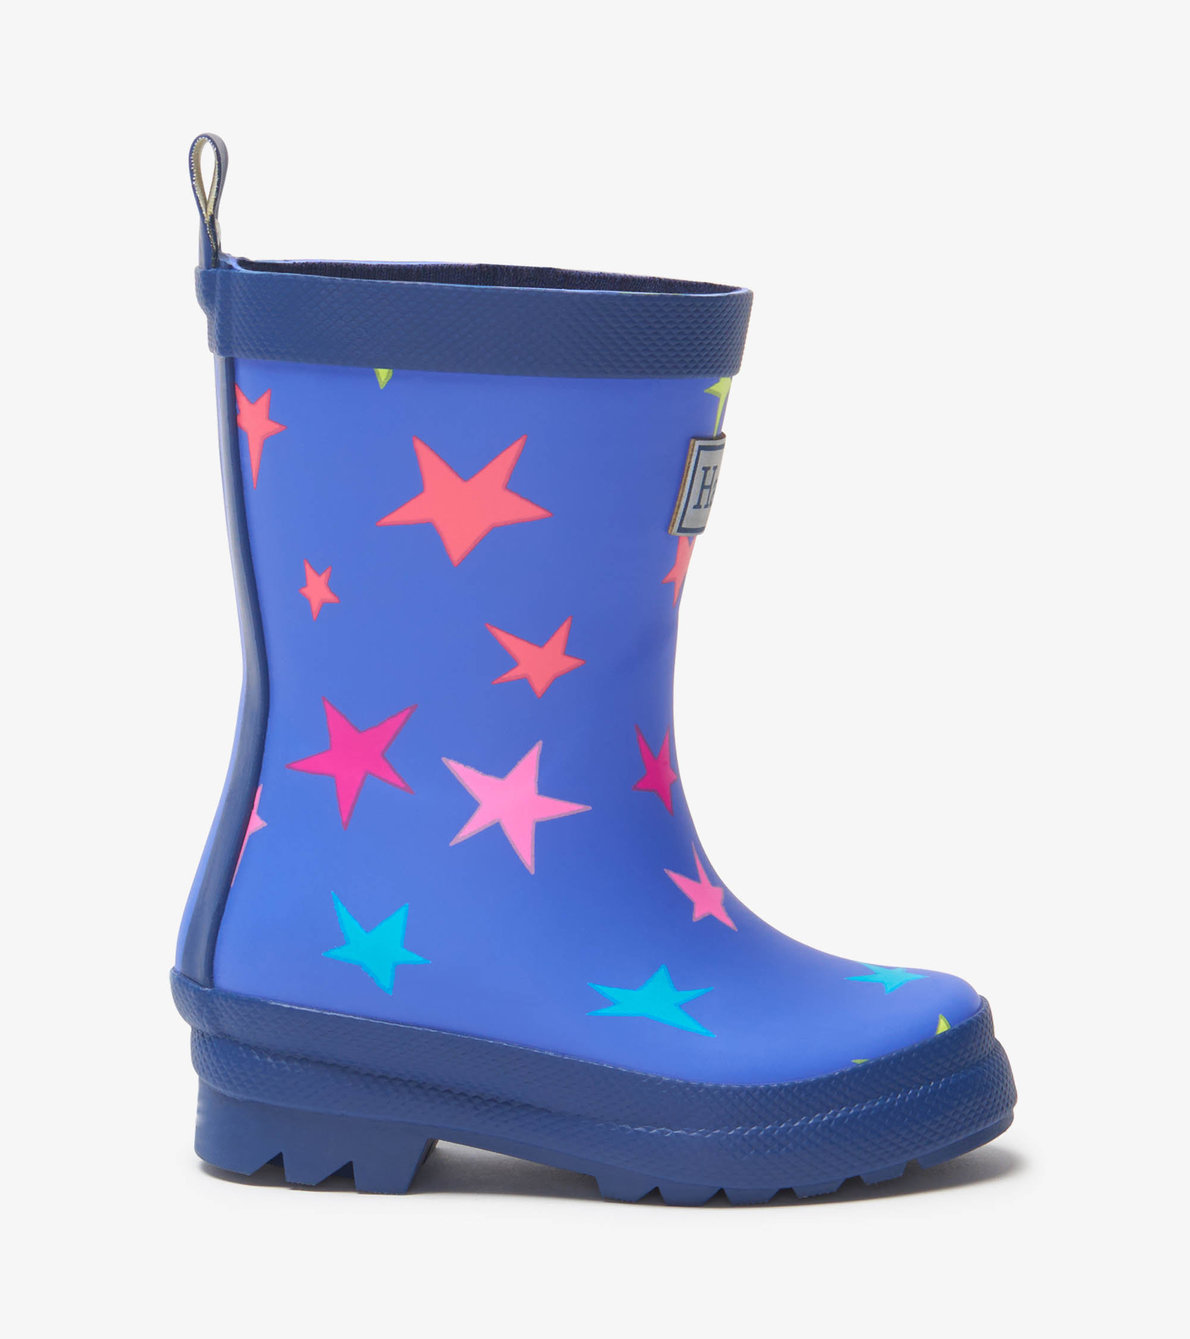 View larger image of My 1st Rain Boots - Scattered Stars